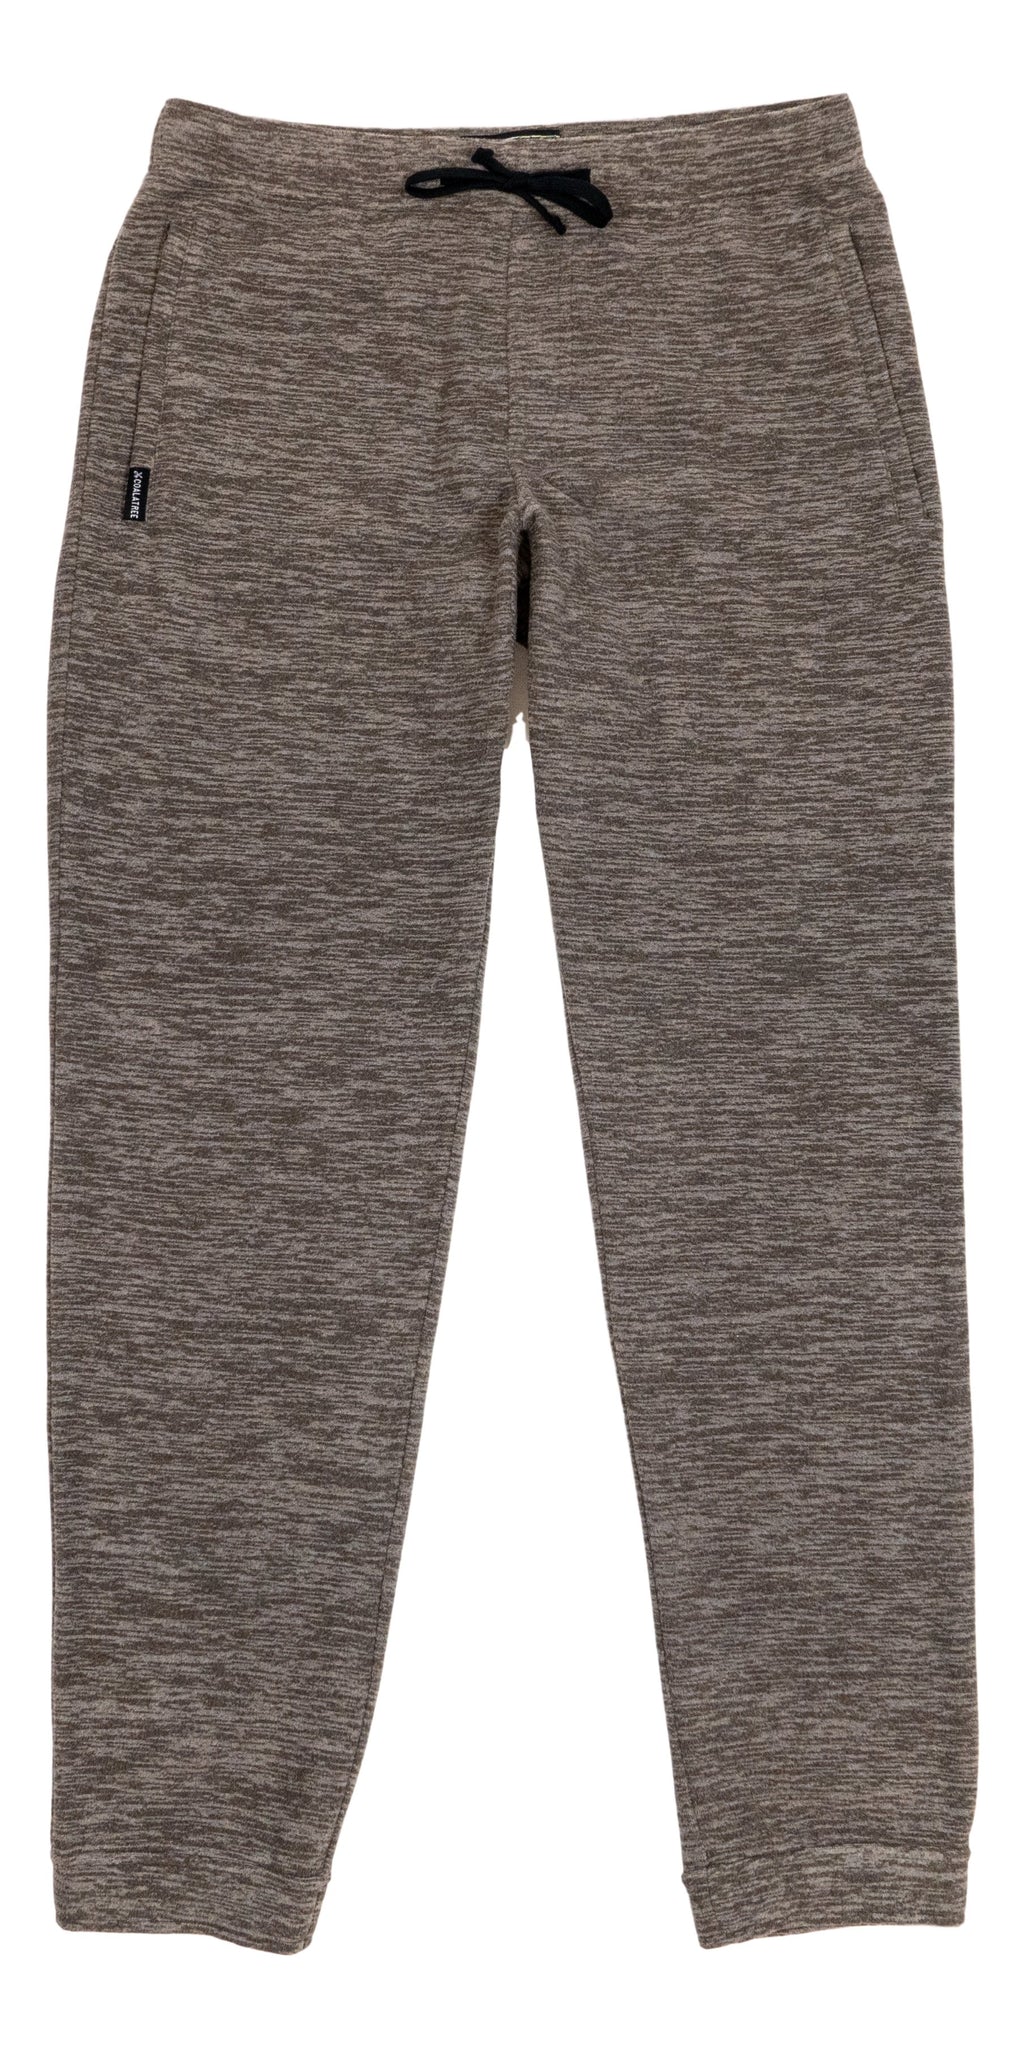 Evolution Joggers: Made from Recycled Coffee Grounds – Coalatree Europe